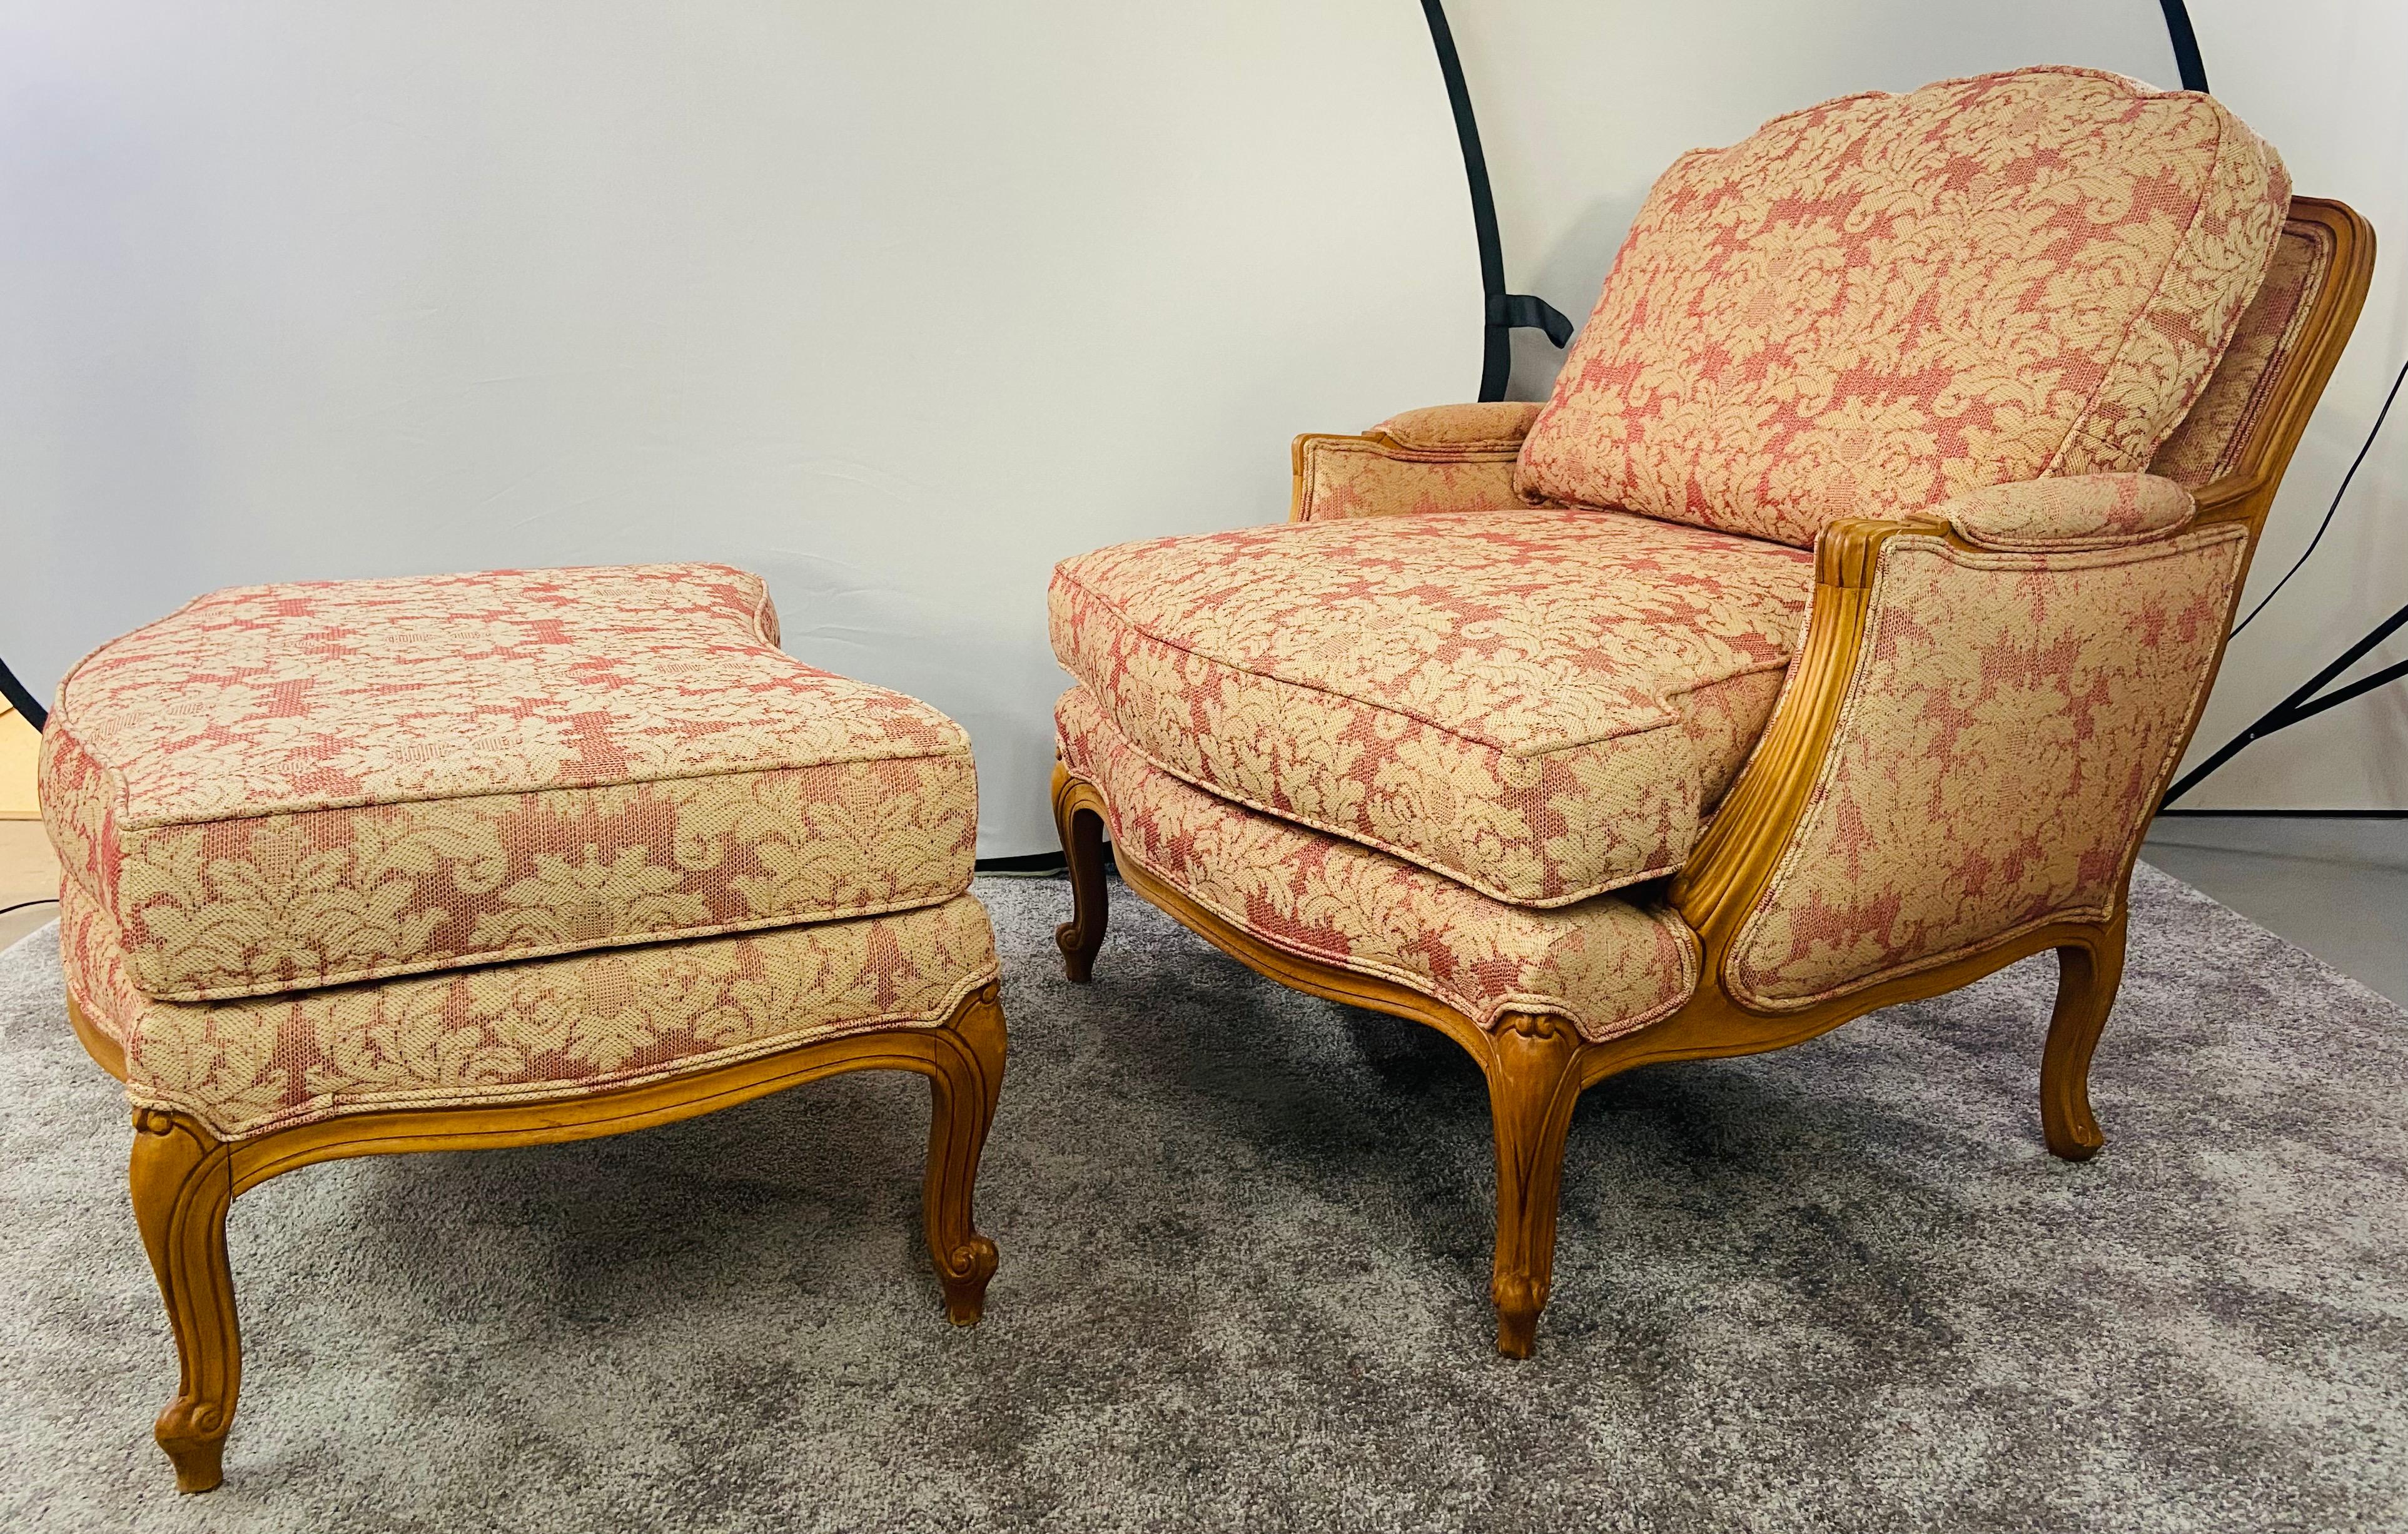 A French Louis XV Versaille style bergere chair or armchair by the Classic manufacturer / designer Ethan Allen. 
The comfortable bergere chair a double-welted back and seat cushion with a carved wood frame. Both the ottoman and the chair are nicely